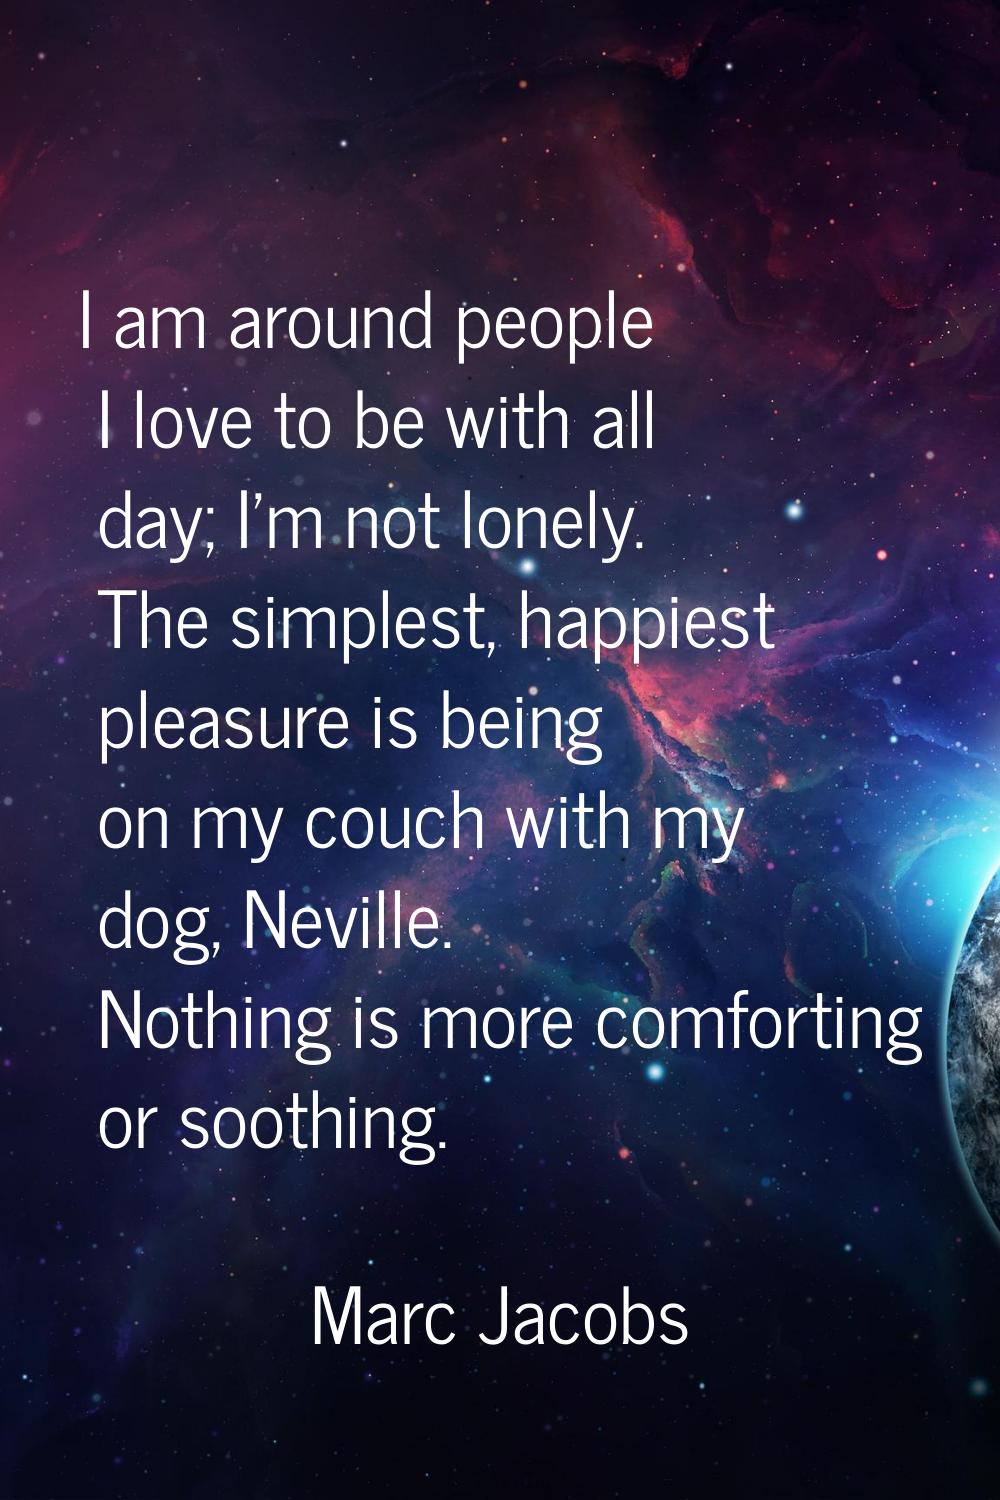 I am around people I love to be with all day; I'm not lonely. The simplest, happiest pleasure is be